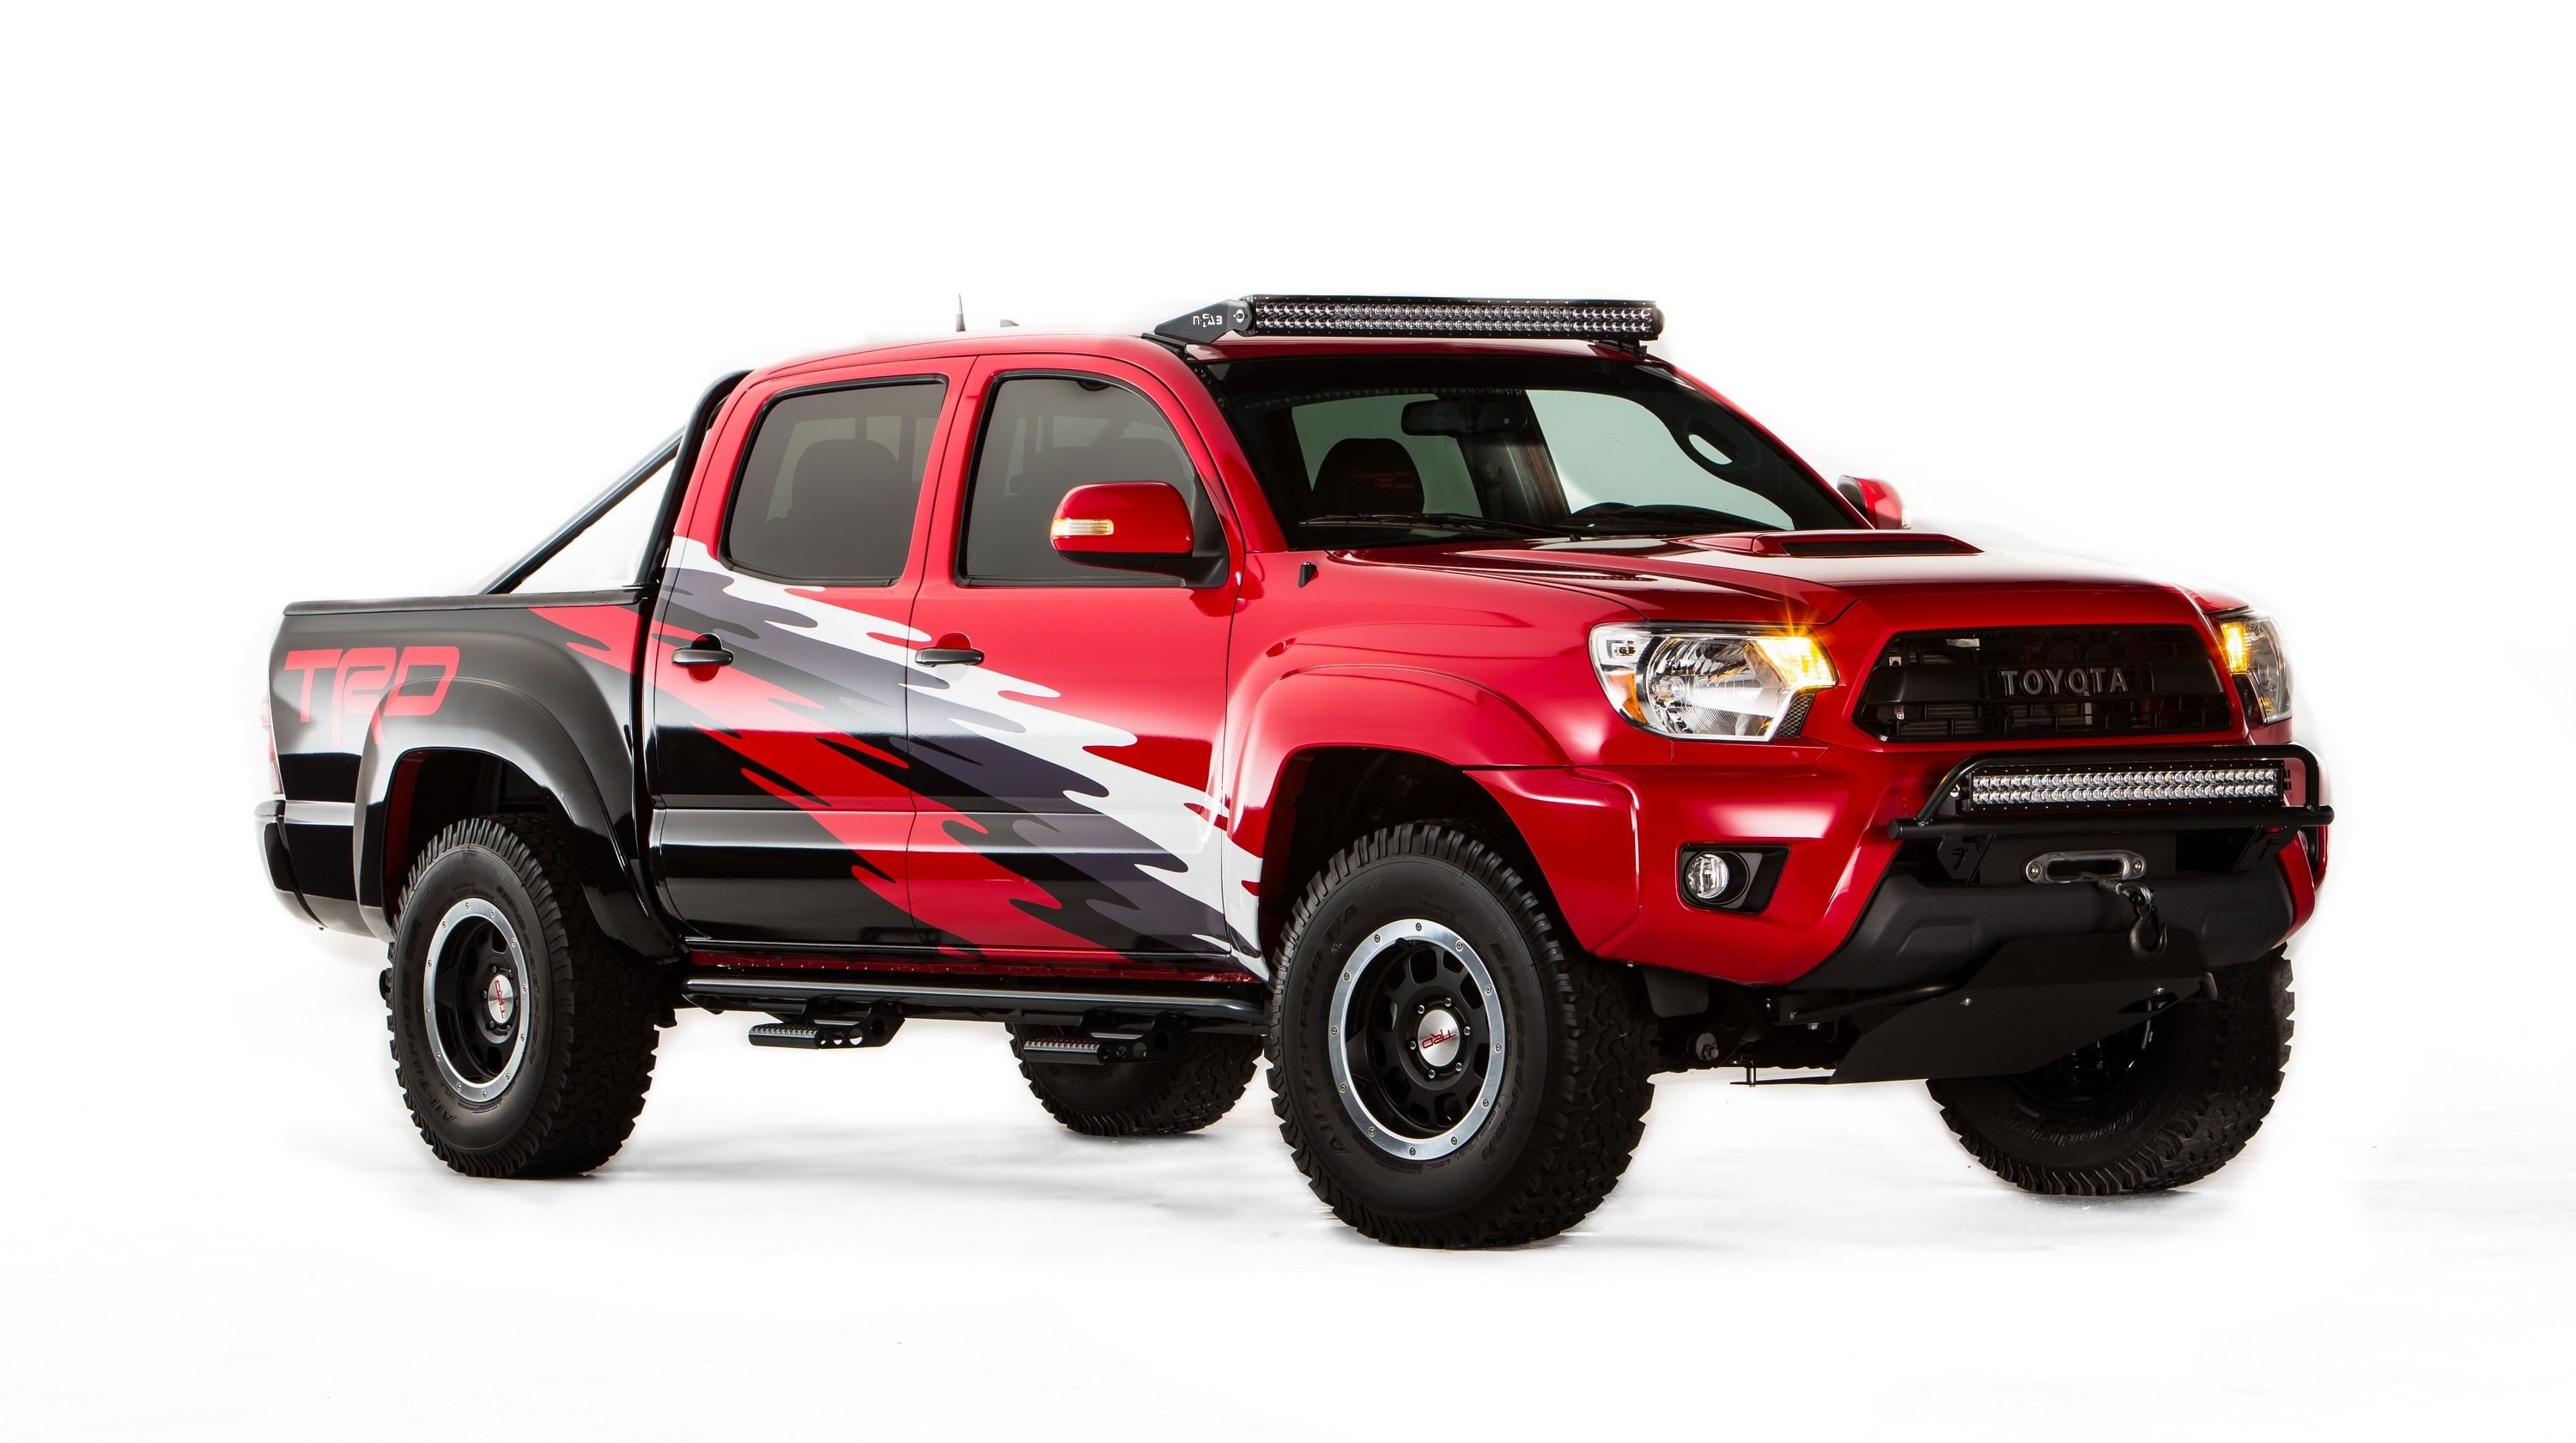  Toyota's entire Baja 1000 lineup will be at SEMA, including this Tacoma TRD.